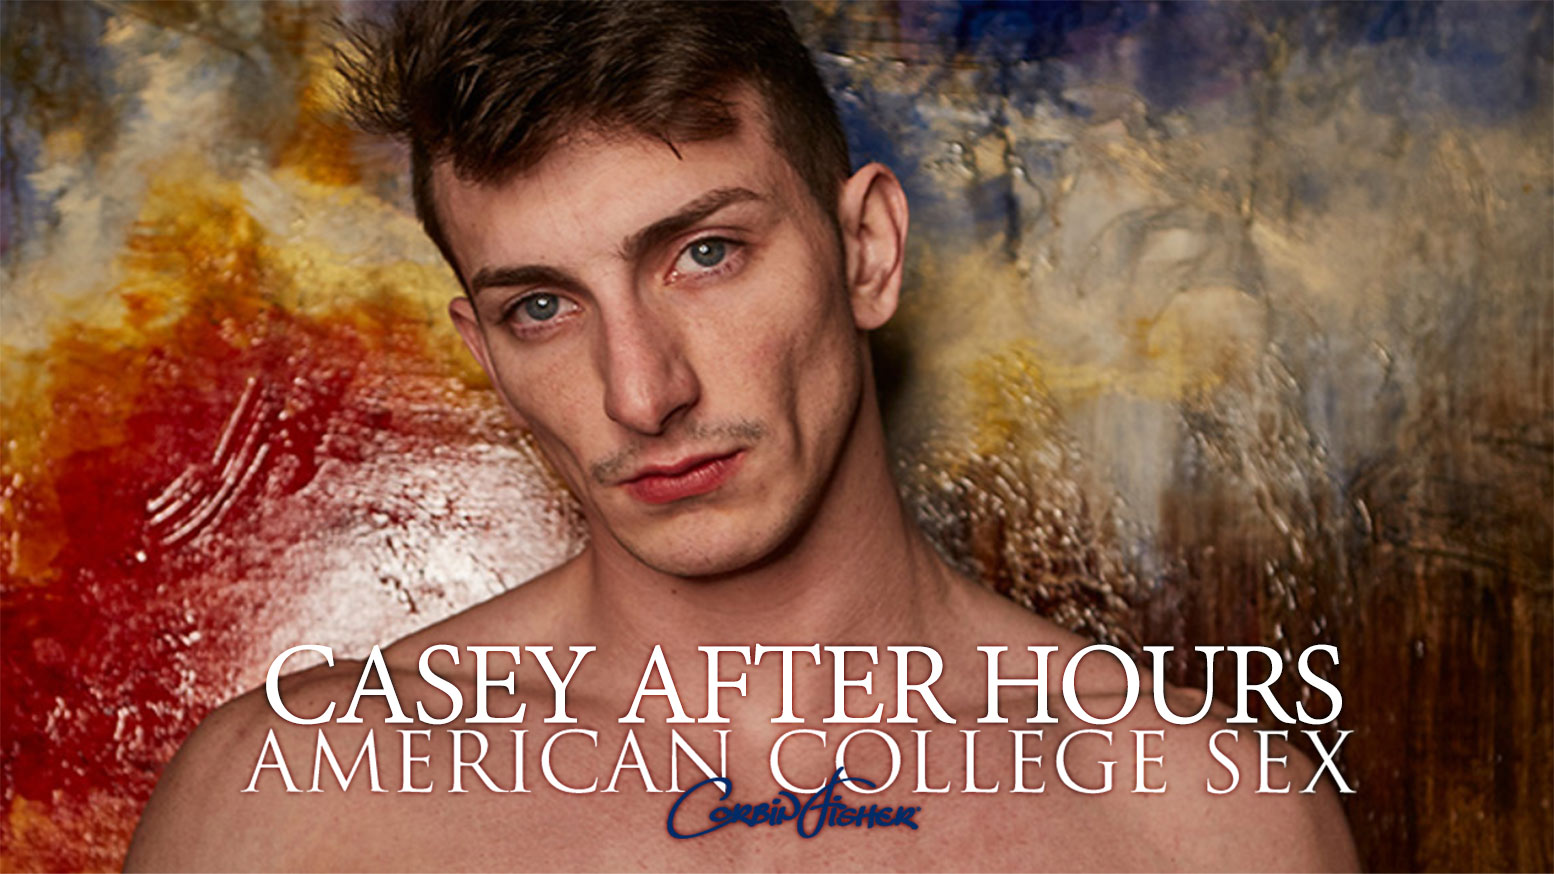 American College Sex Casey After Hours